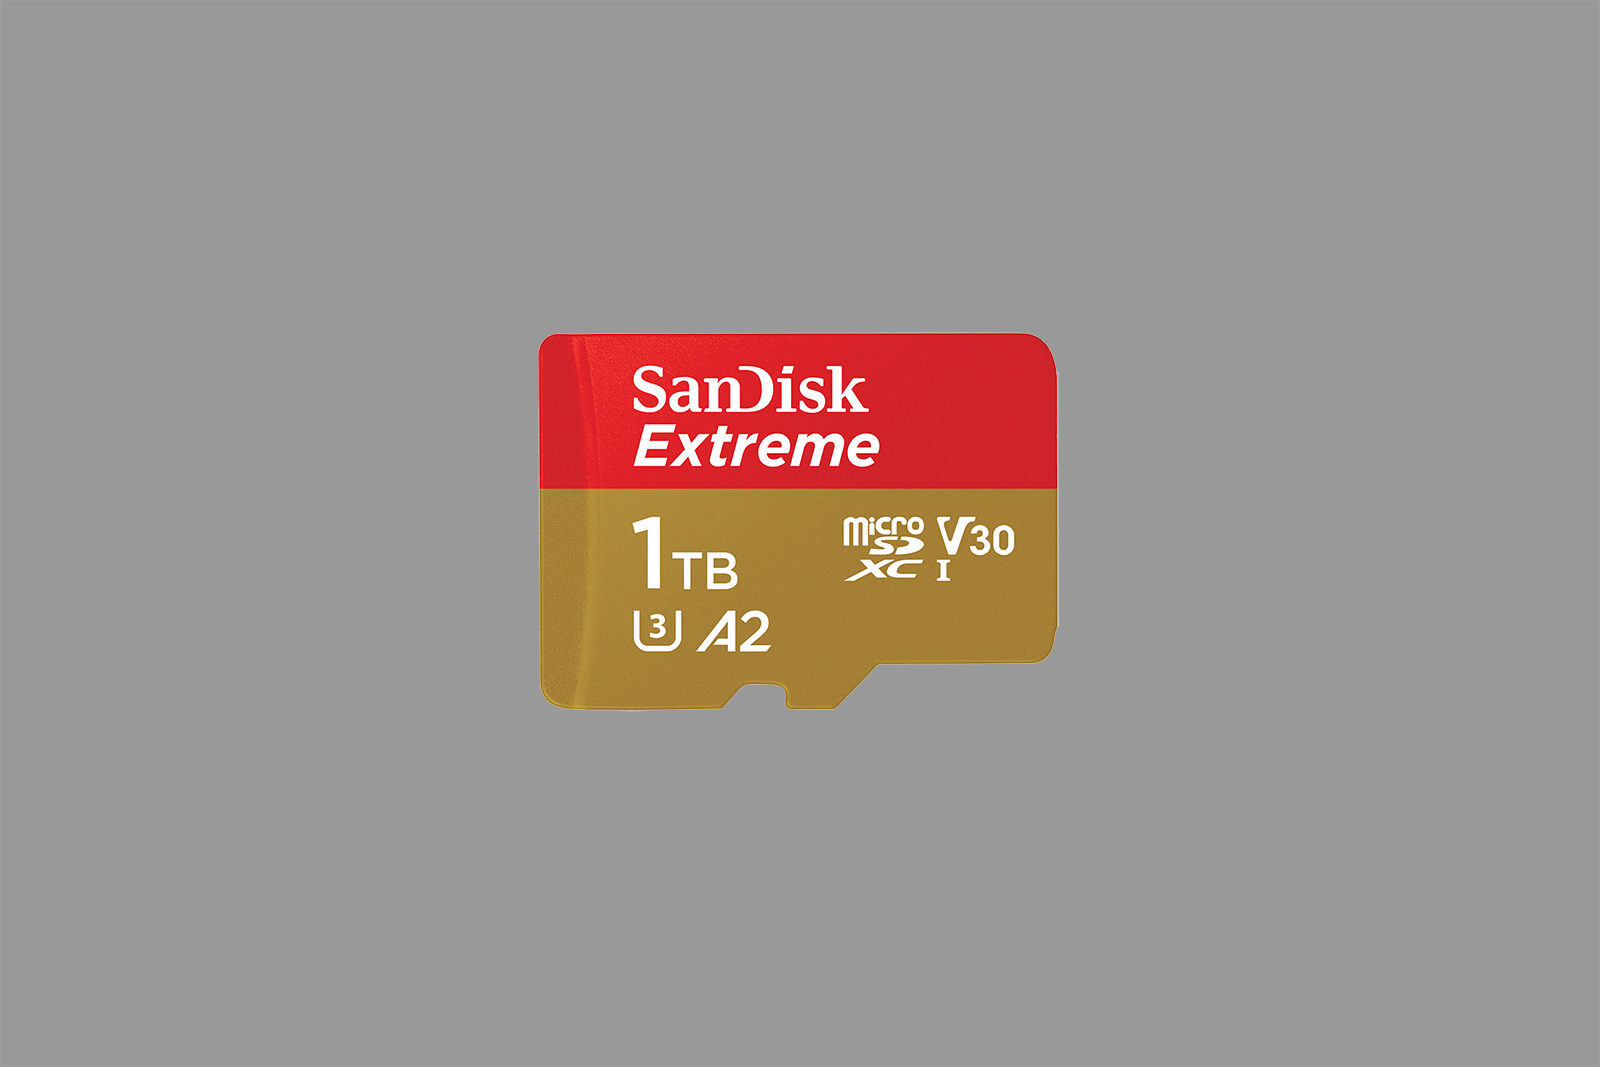 SanDisk Extreme 1TB microSD Review